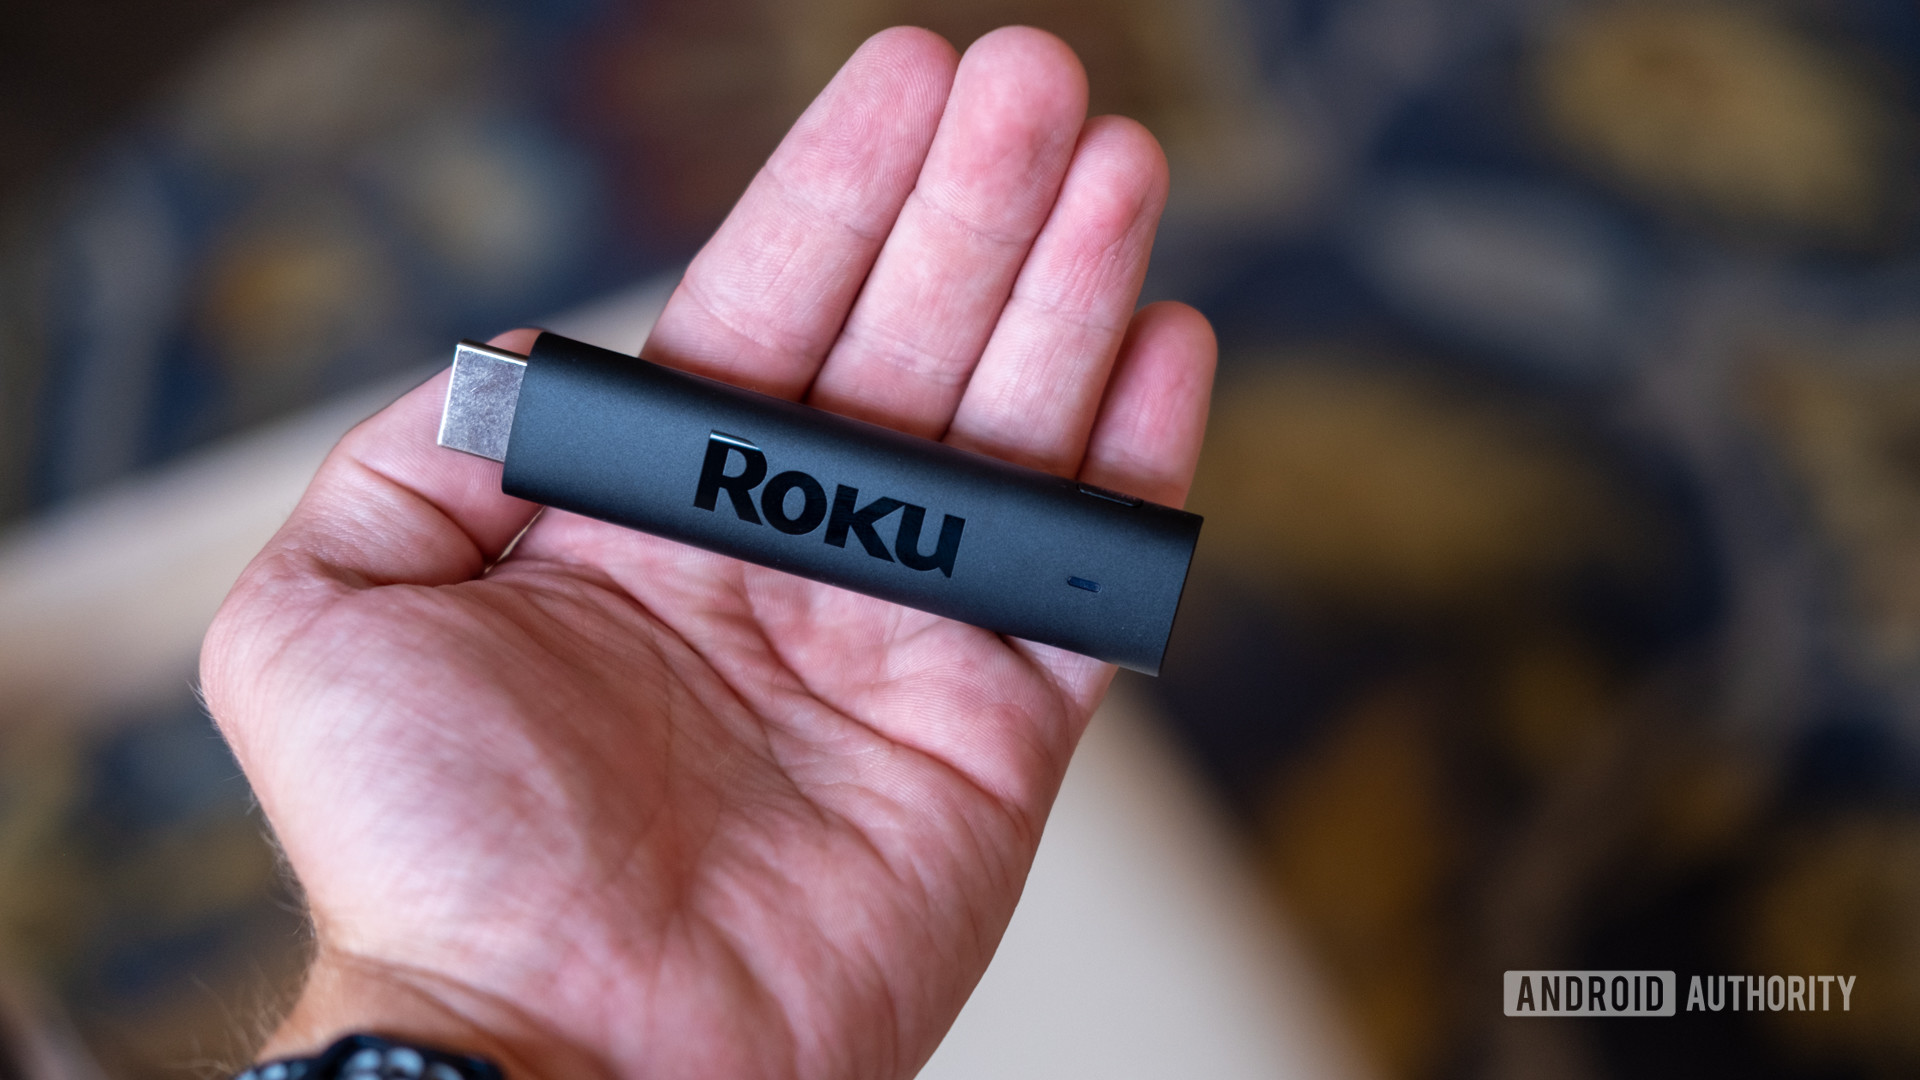 The Roku Streaming Stick 4K in hand